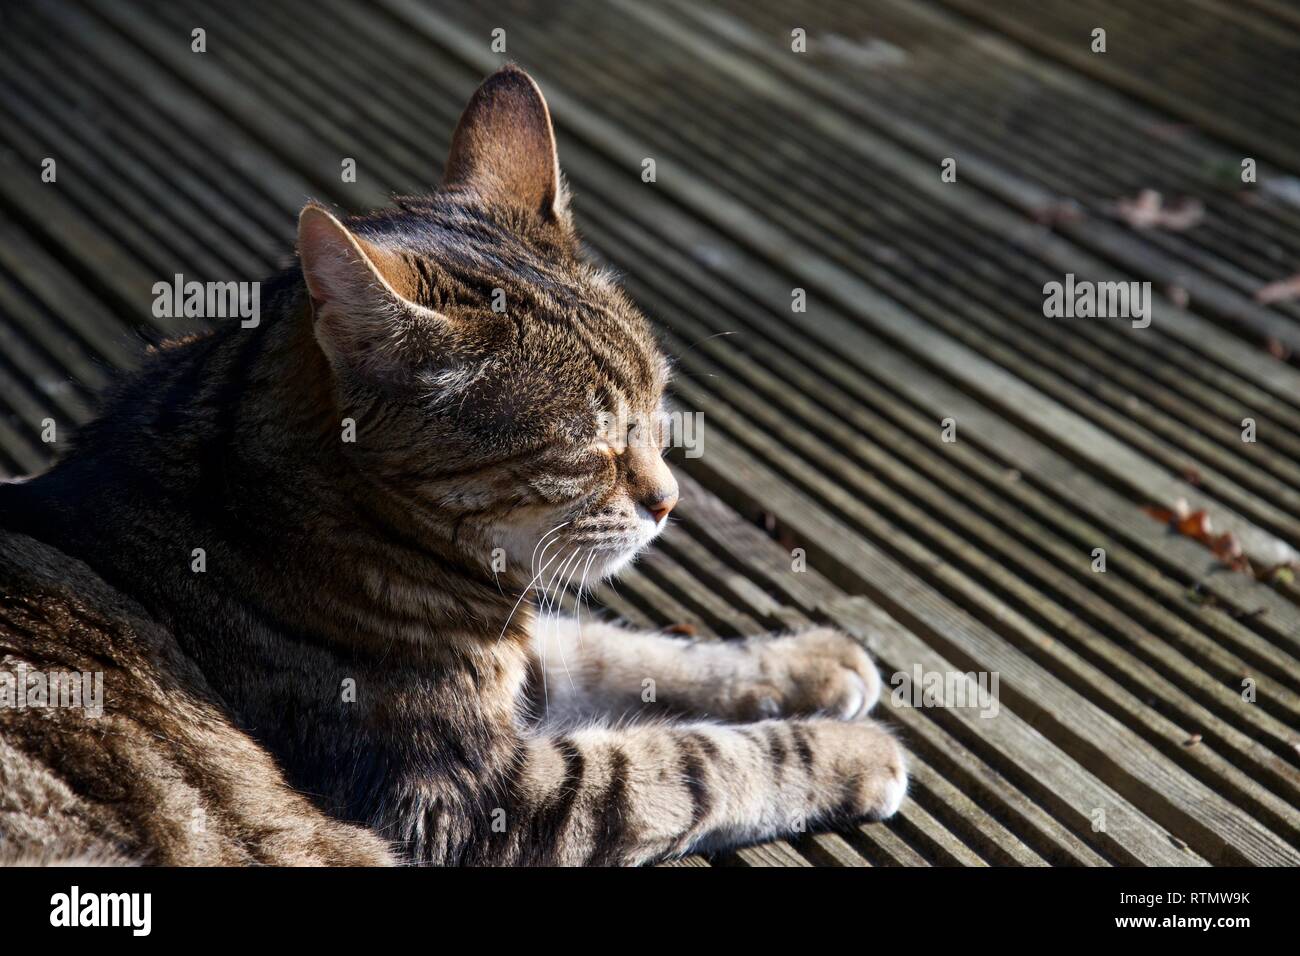 A brown, ginger, striped pet cat lies on decking outdoors in a garden, her eyes closed and partially sunbathing in bright sunlight Stock Photo